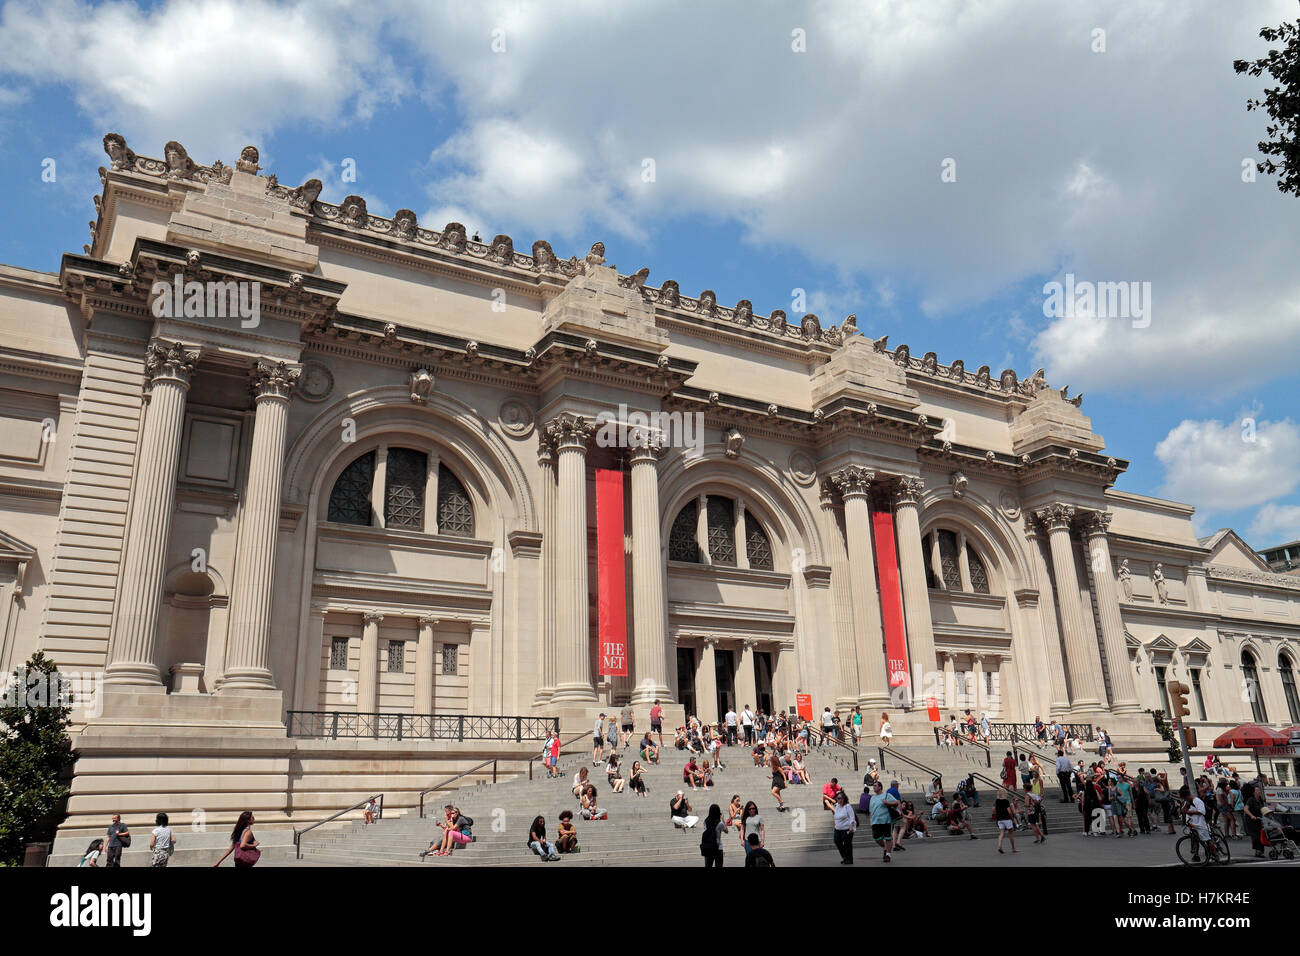 The 5th Avenue entrance to the Metropolitan Museum of Art, Manhattan, New York, United States. Stock Photo